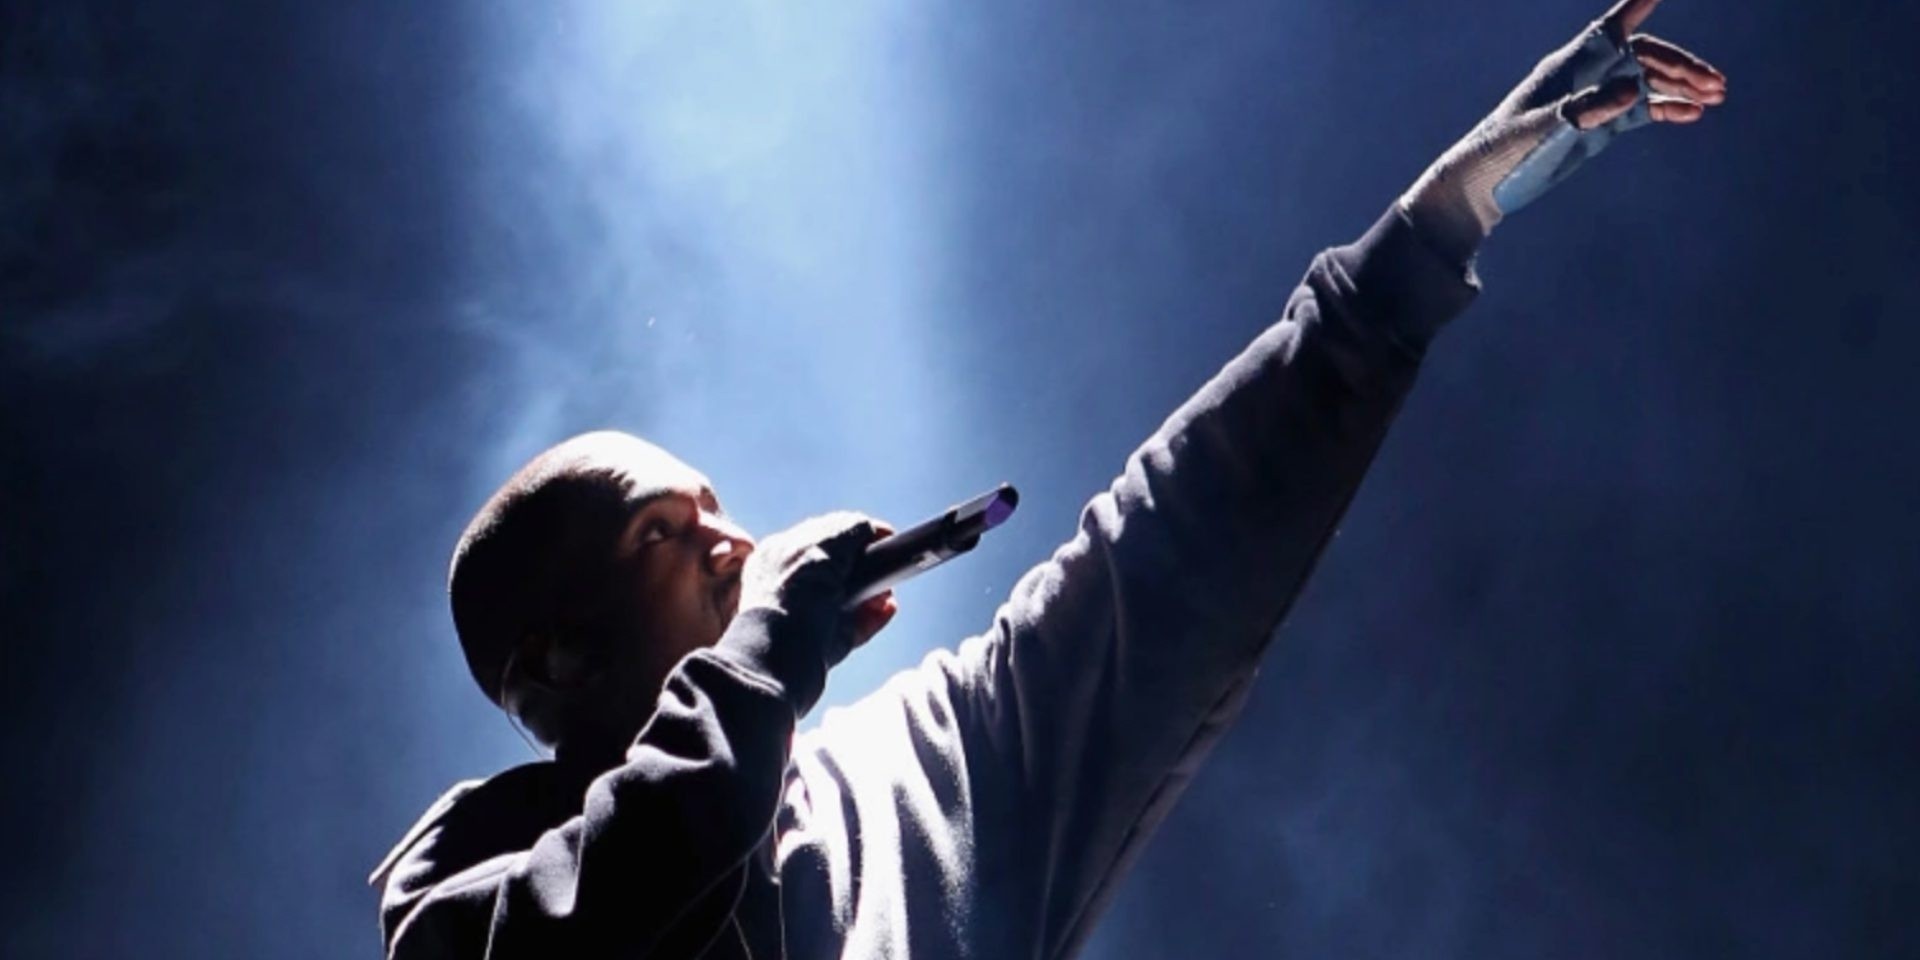 Kanye West's Coachella Sunday Service Set will be held on a mountain